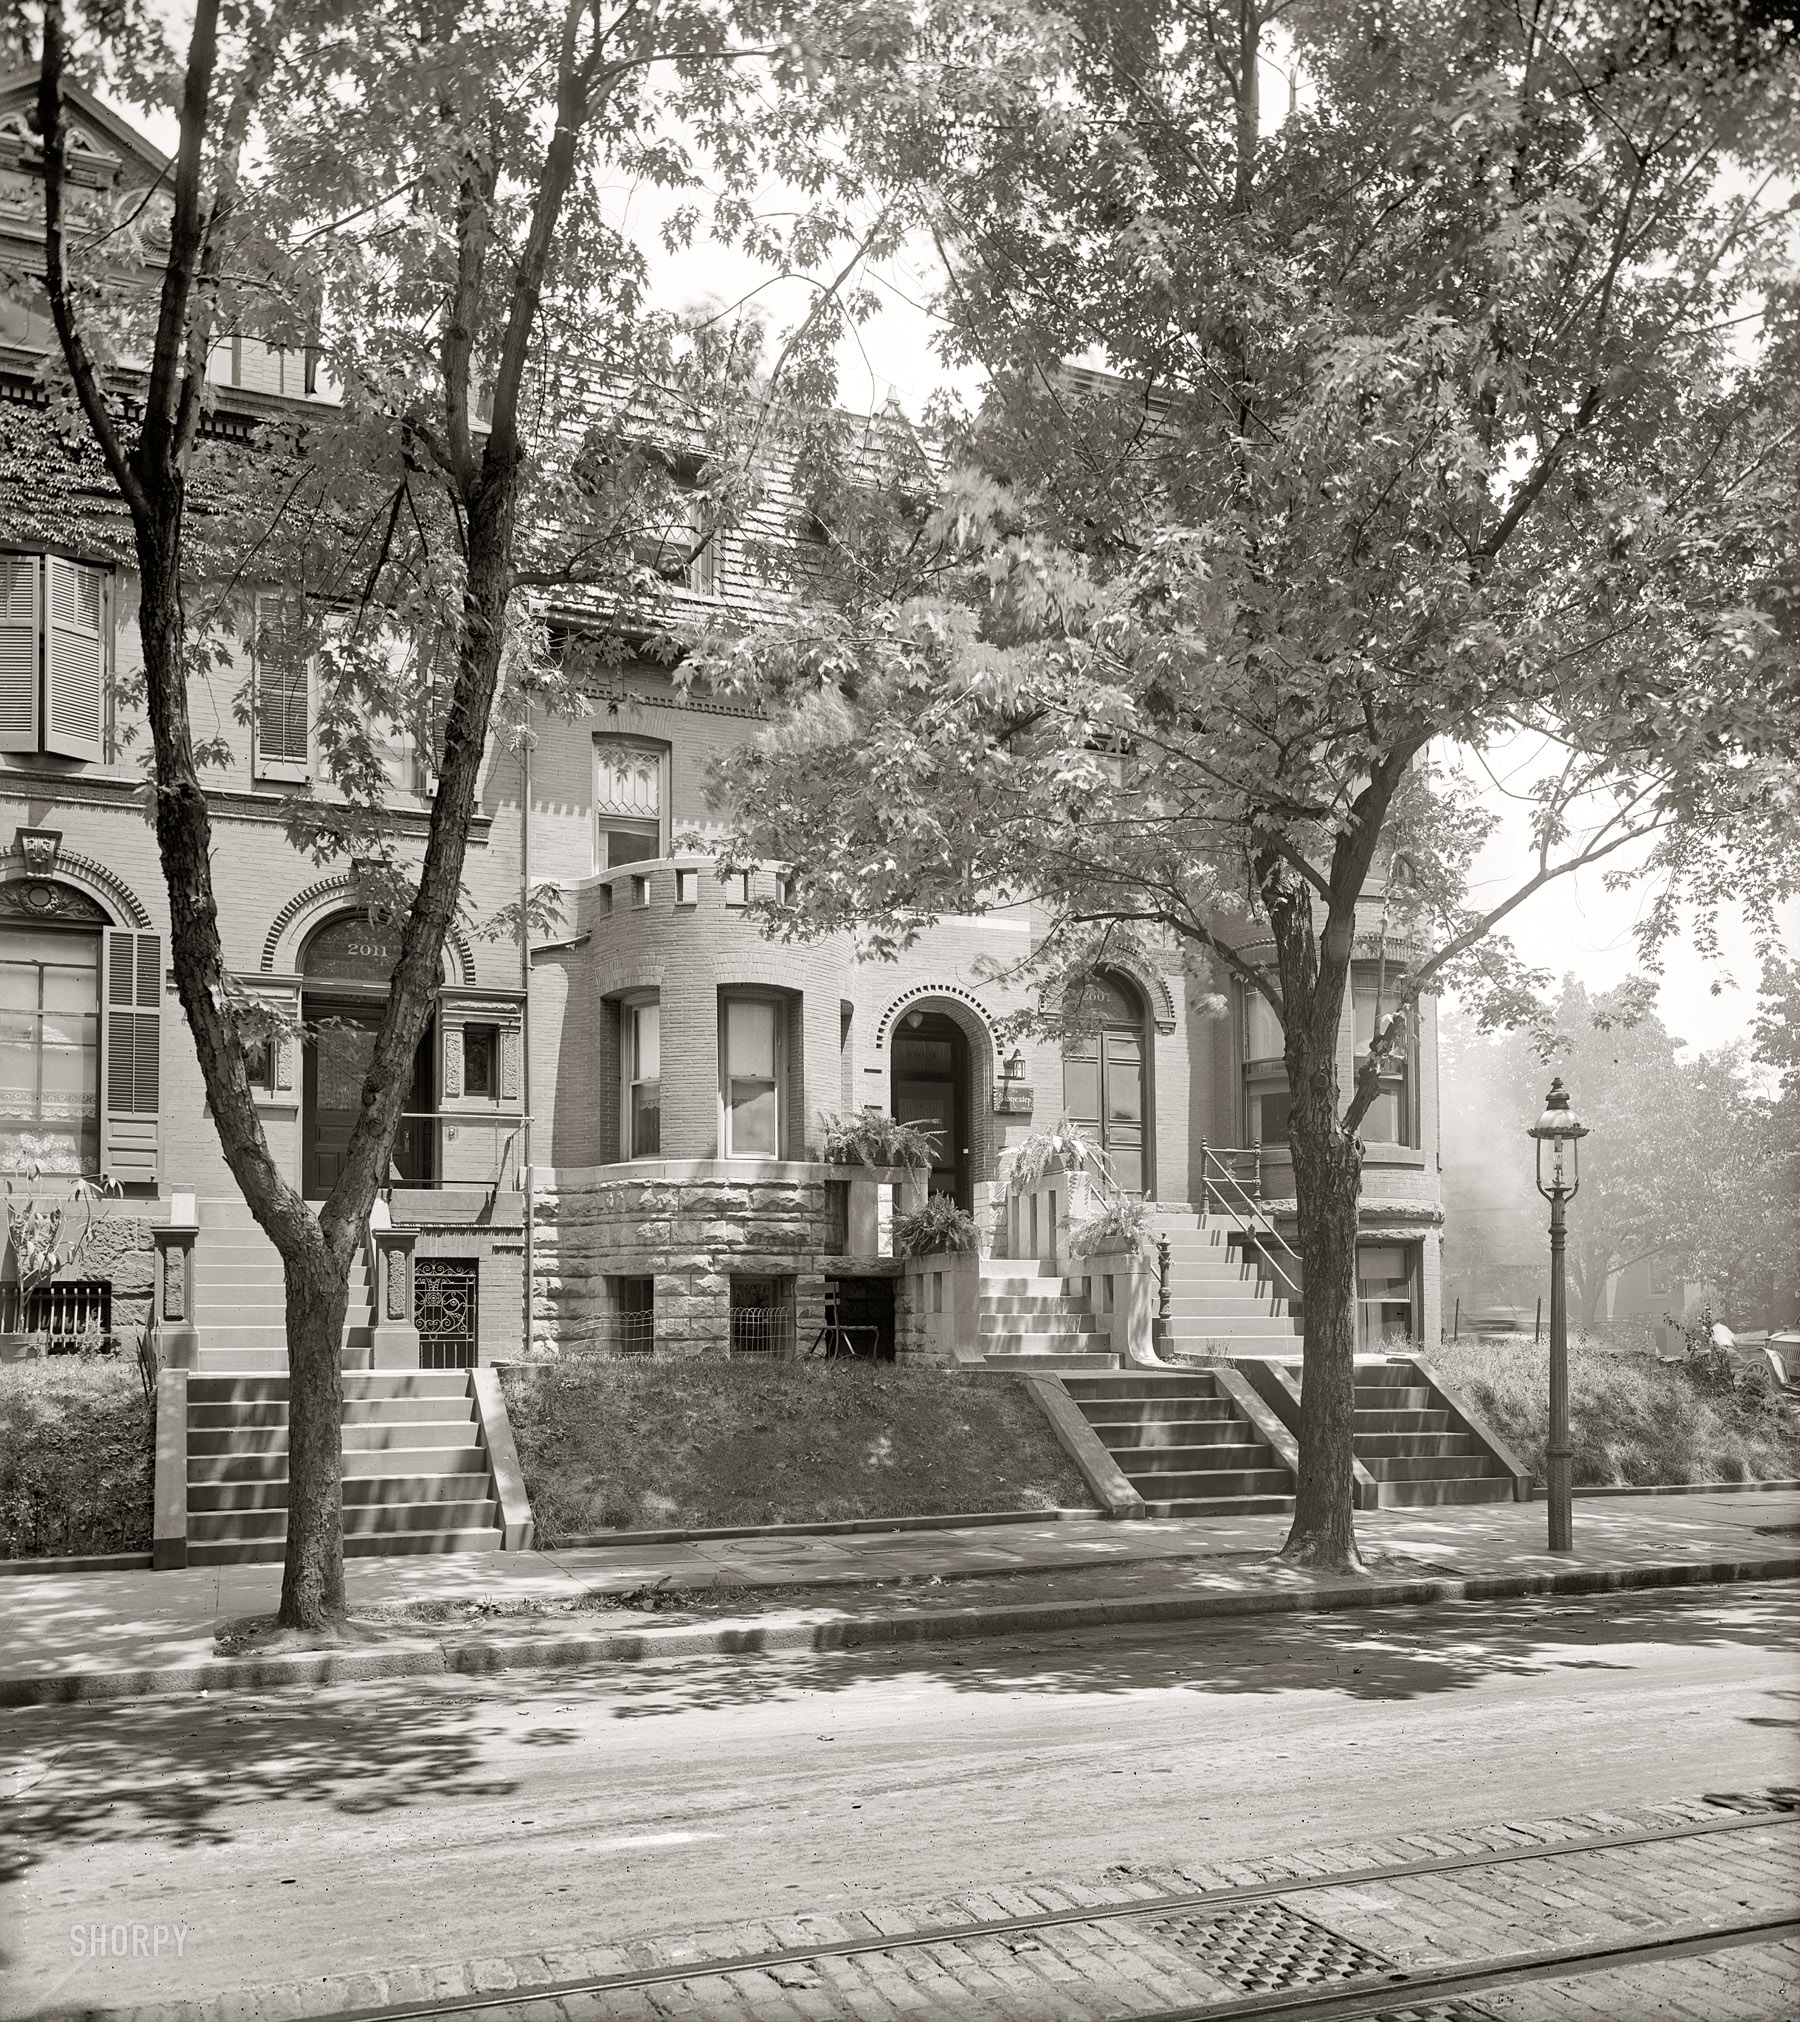 Washington, D.C., circa 1925. "Mrs. B.L. O'Leary house." The 2009 F Street N.W. residence of one Mrs. Bessie Lawton O'Leary, born Bessie Stanton Lawton, mother of Edwin Lawton O'Leary. The sign by the door reads "Stonestep -- Rooms, Meals." National Photo Company Collection glass negative. View full size.